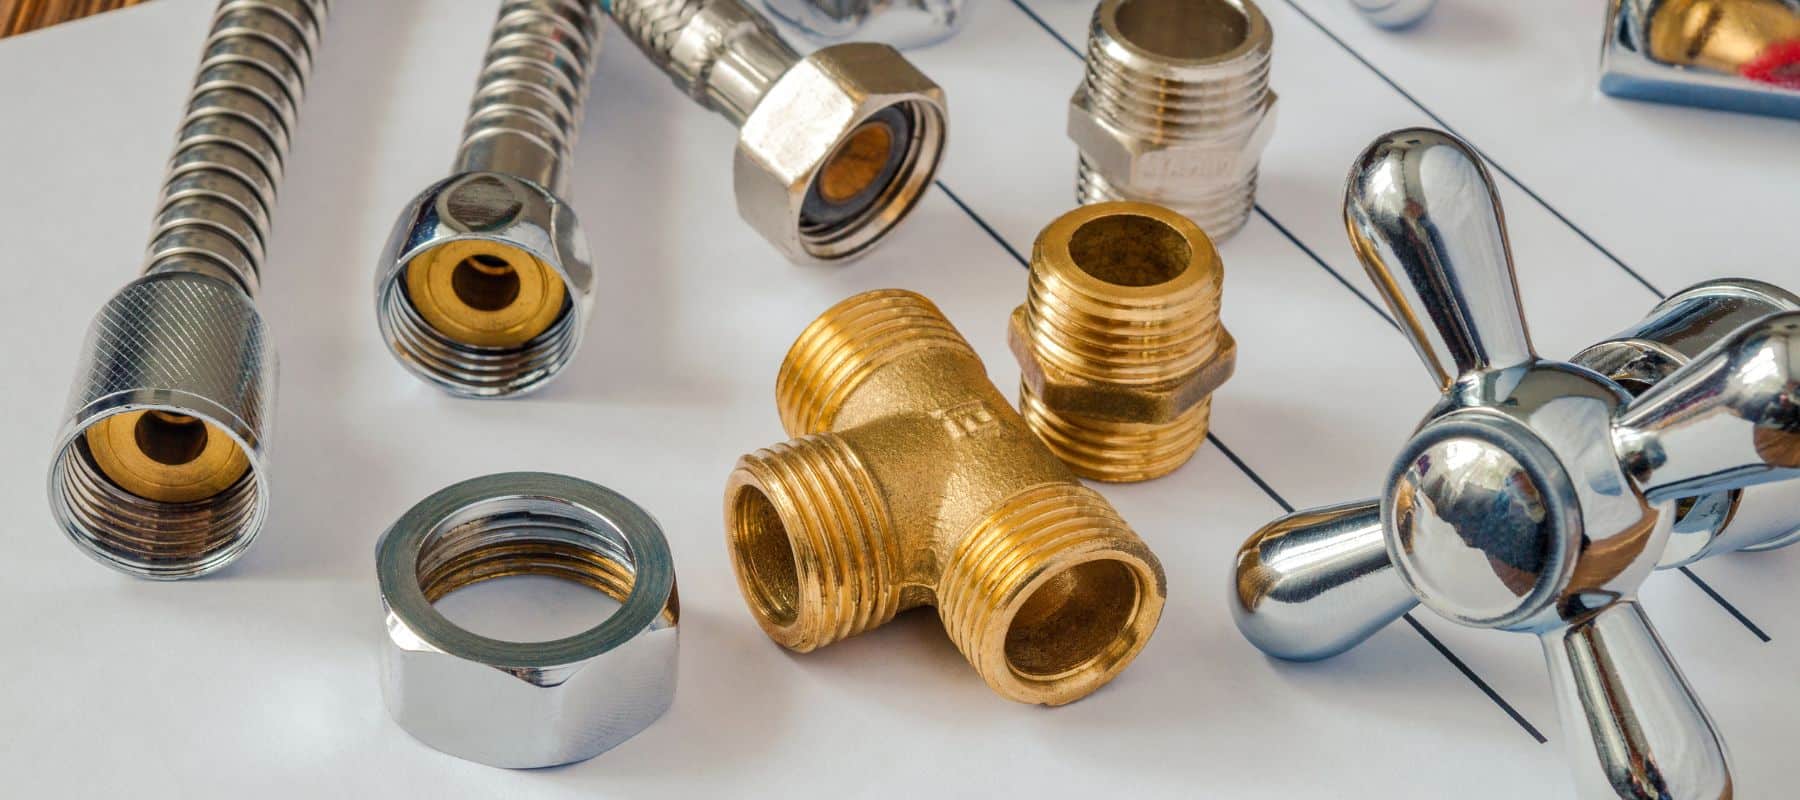 about us page graphic. Plumbing parts and bolts